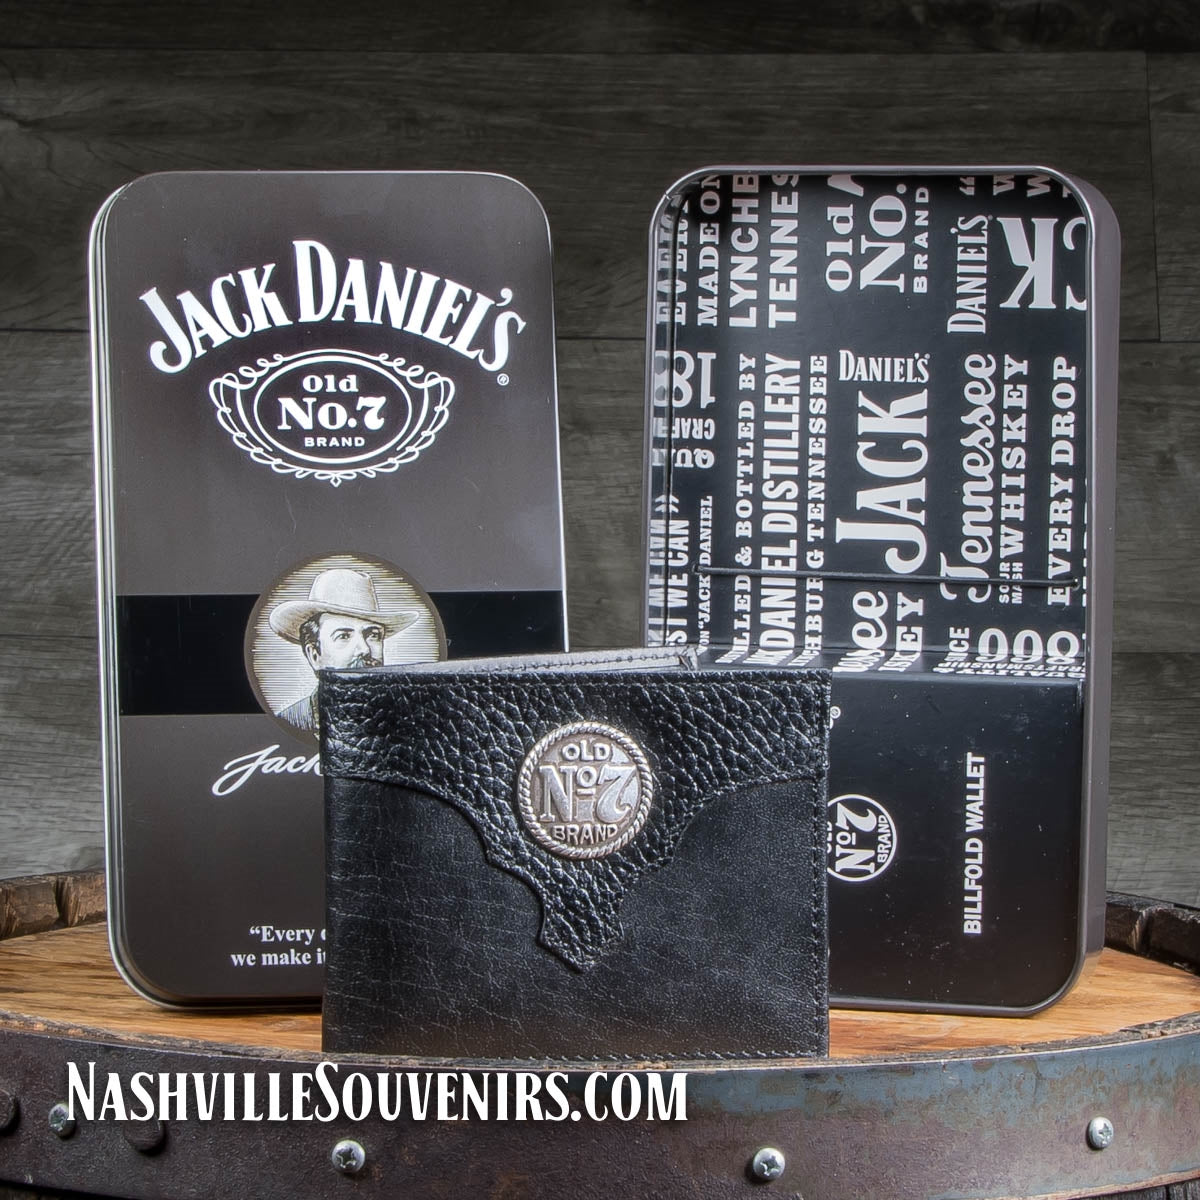 Jack Daniel's Old No.7 Brand Billfold Wallet with Medallion. Get one today with FREE SHIPPING on all US orders over $75! One of for most popular designs.